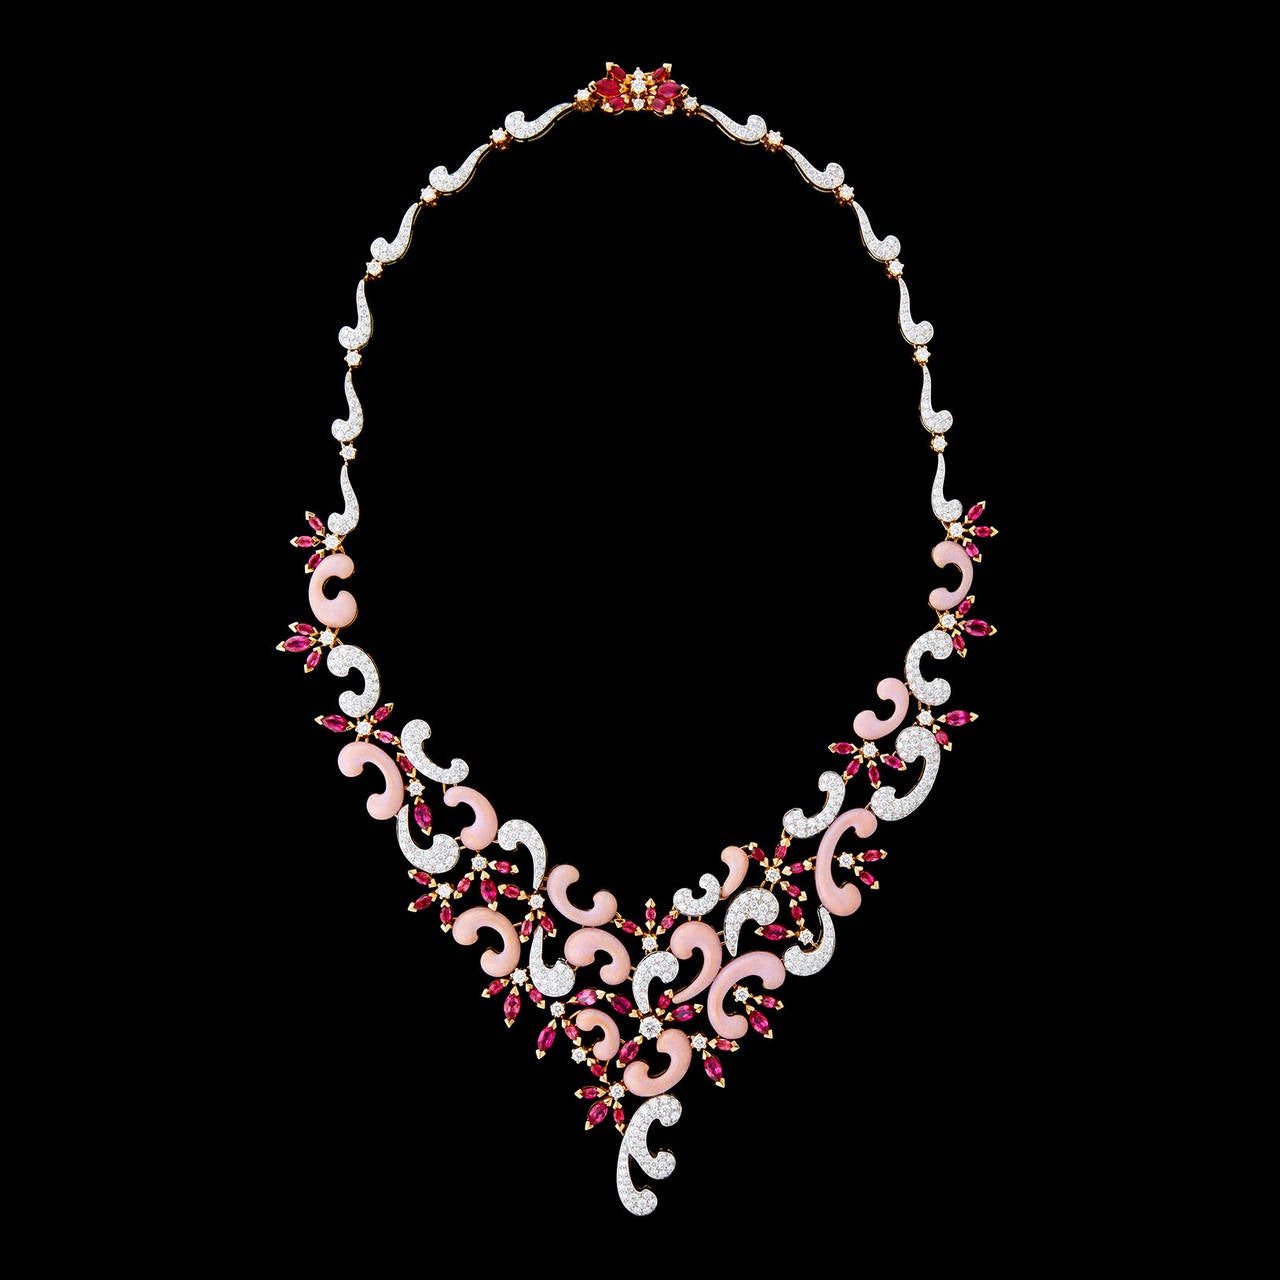 One of a Kind Fabergé Necklace Features a Flower and Swirl Motif of Tourmaline, Pavé Diamonds and Guilloché Enamel. The necklace features approximately 10.00 carat total weight of marquise shaped tourmaline and 8.68 carat total weight of round